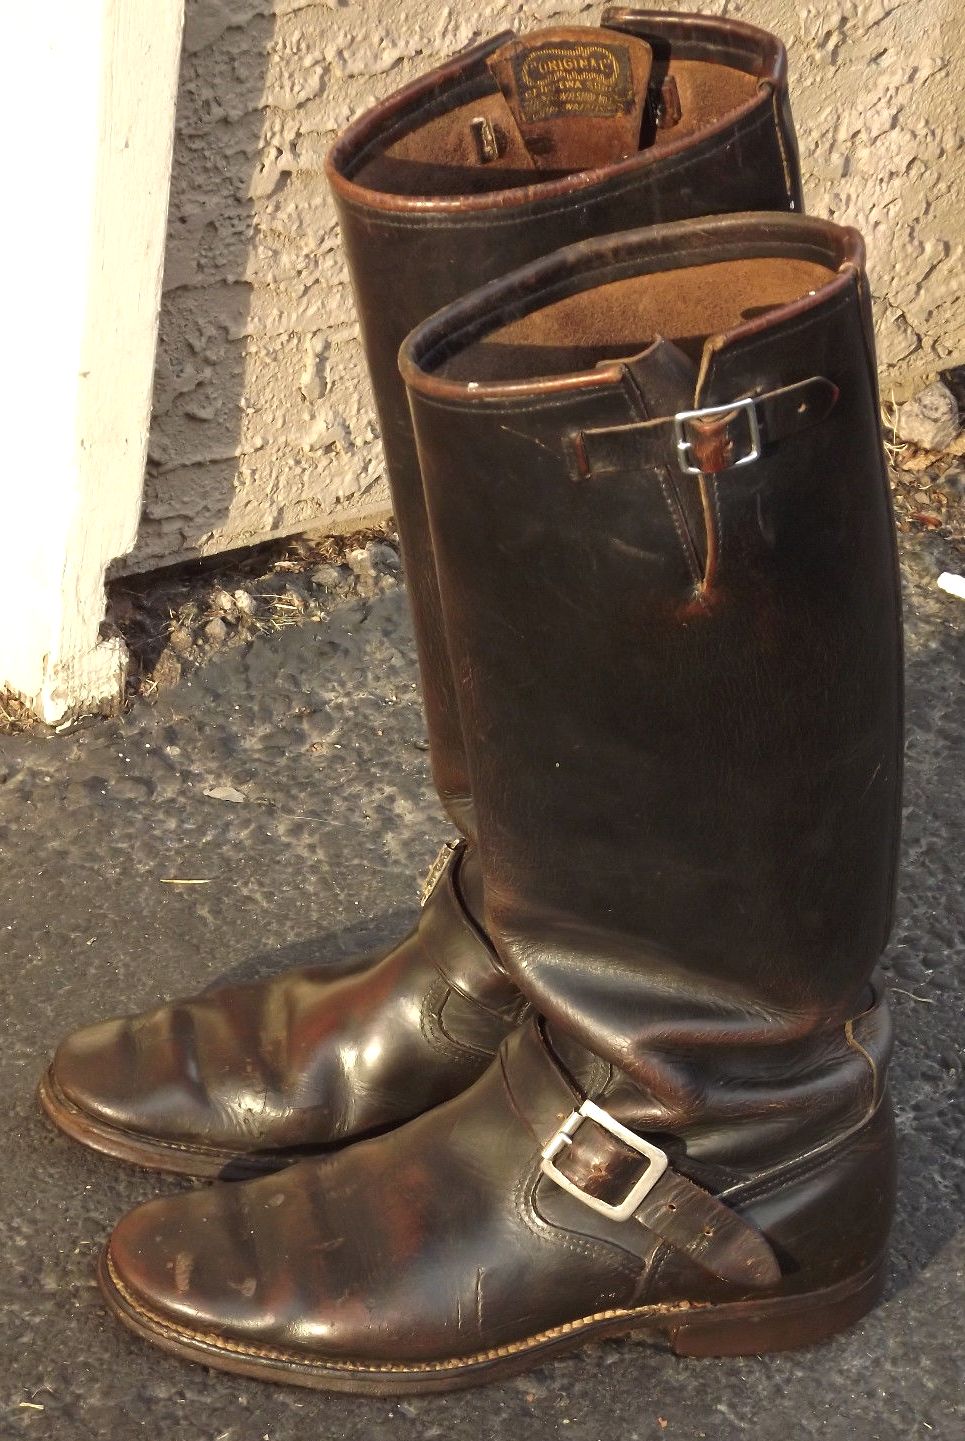 Vintage Engineer Boots: PRE-1955 TALL CHIPPEWA ENGINEER BOOTS